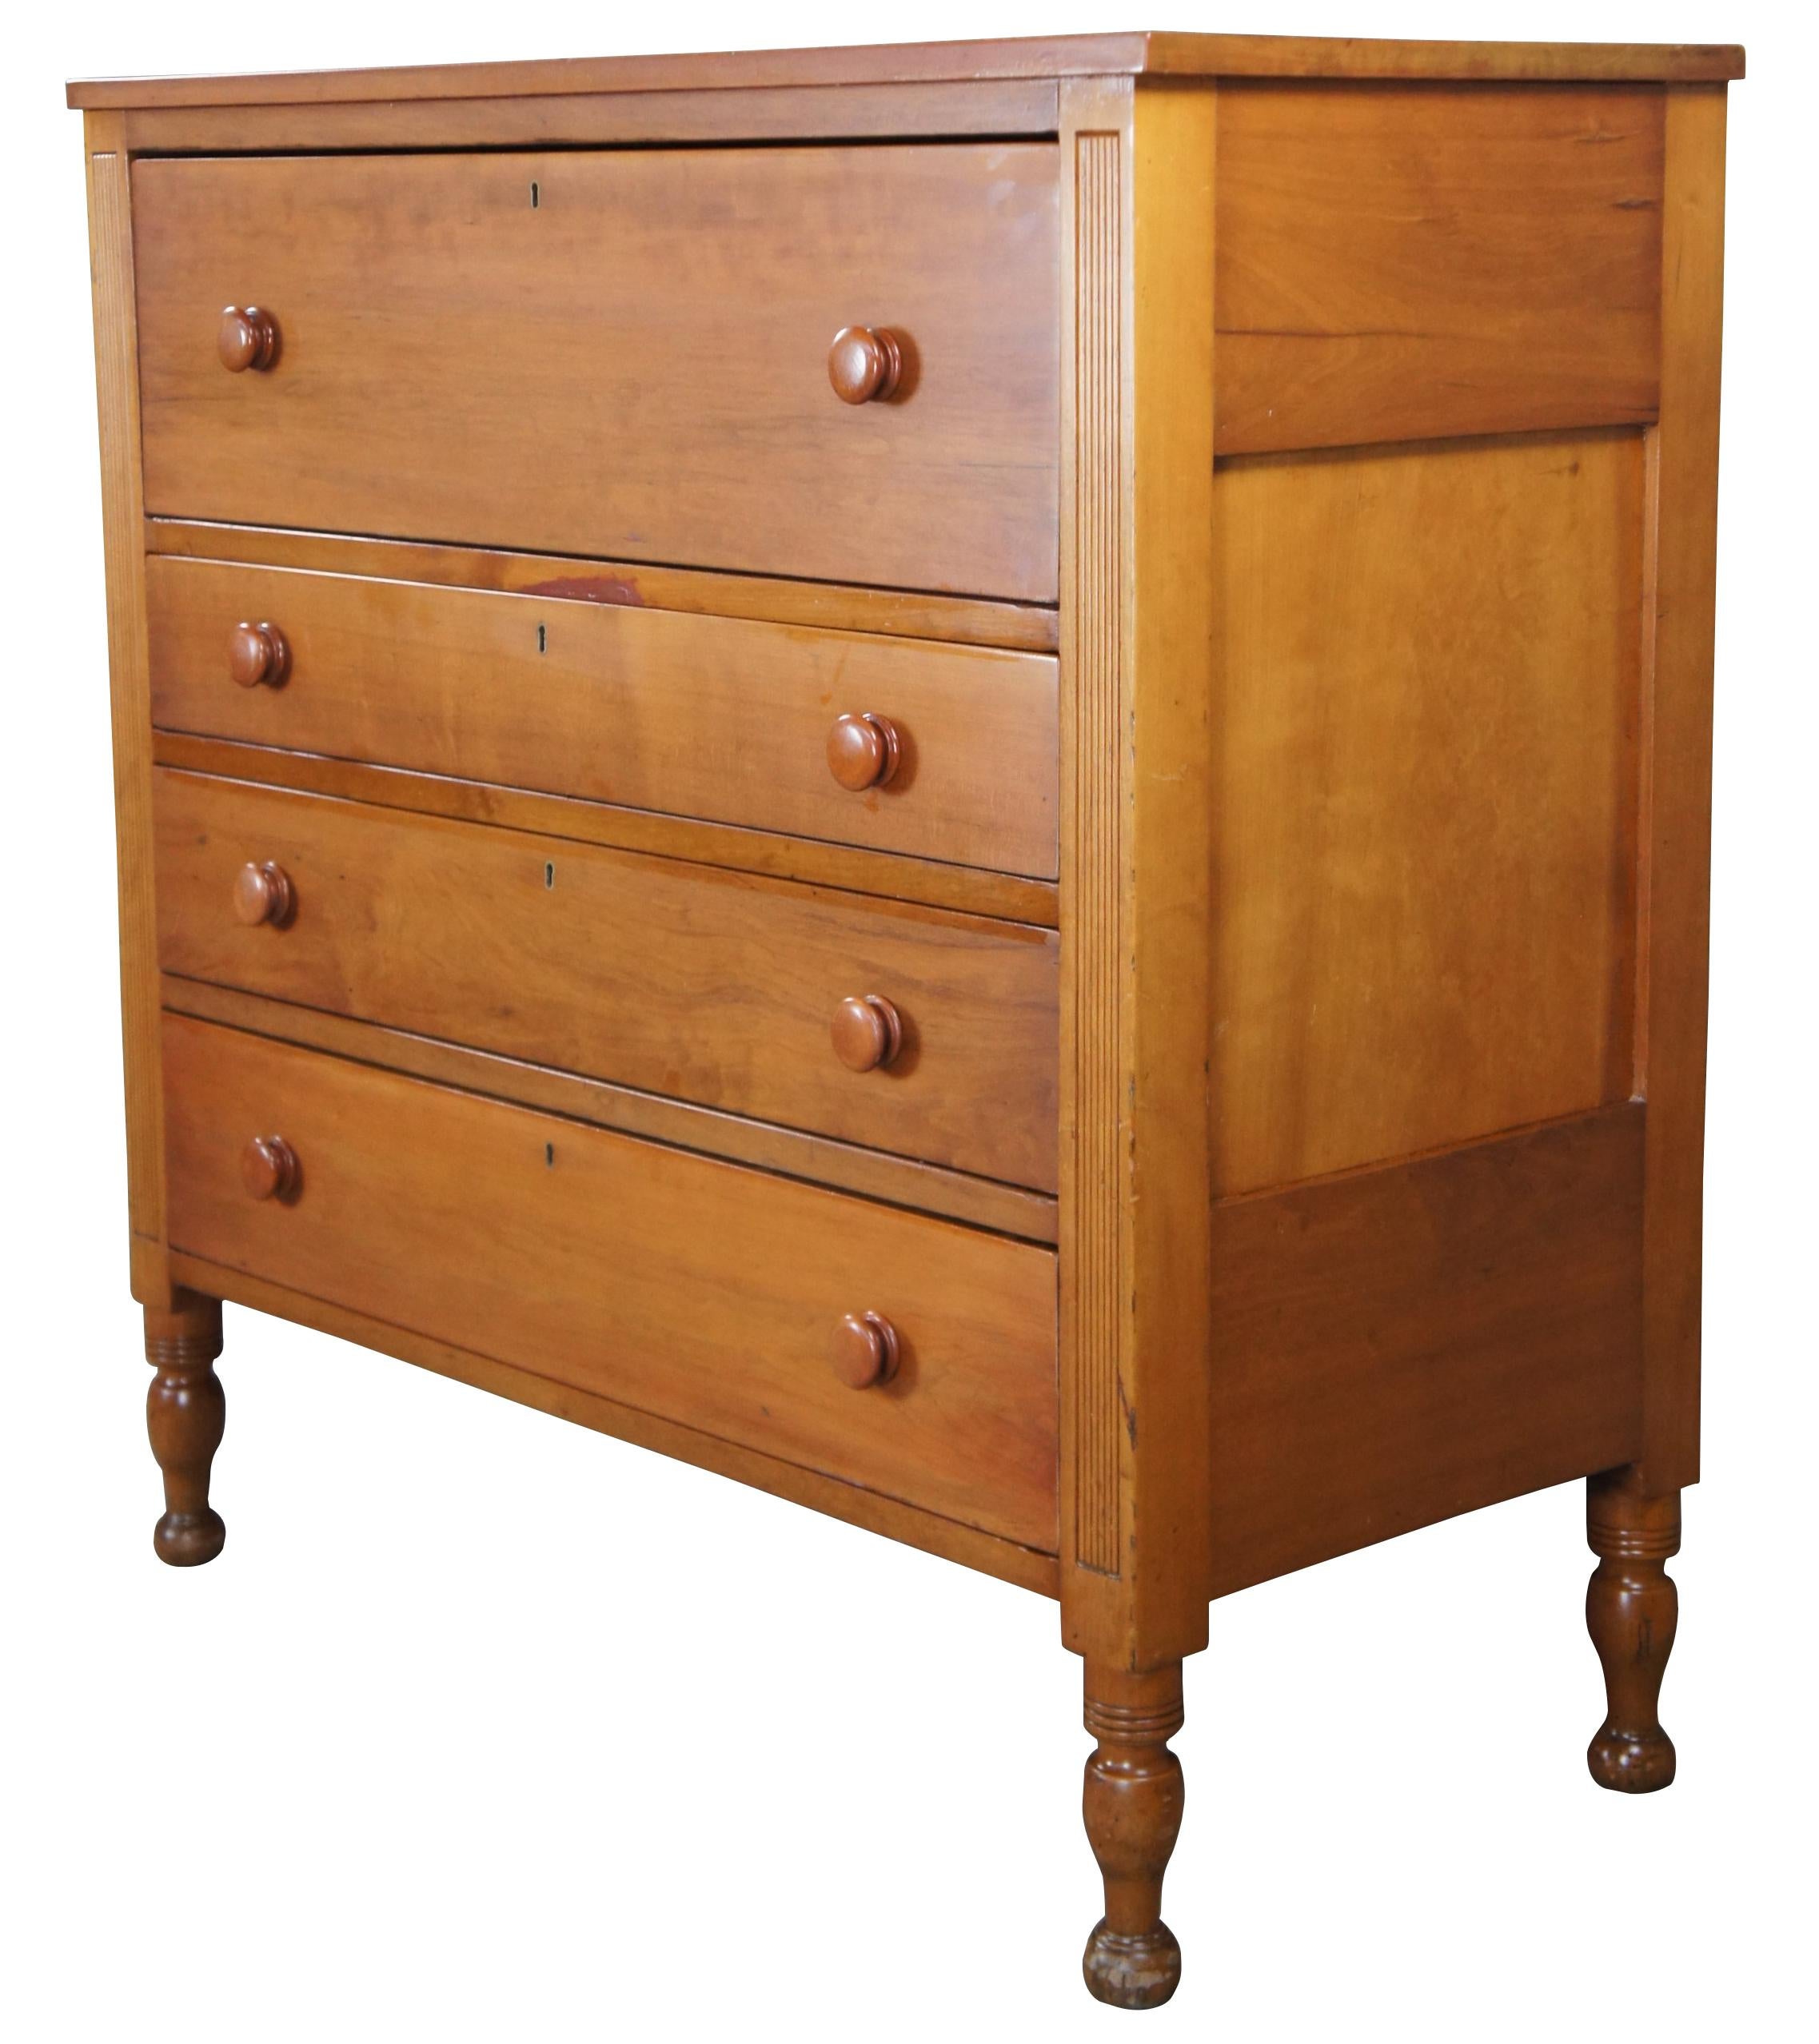 Federal Antique 19th C. Early American Solid Cherry Tallboy Chest of Drawers Dresser